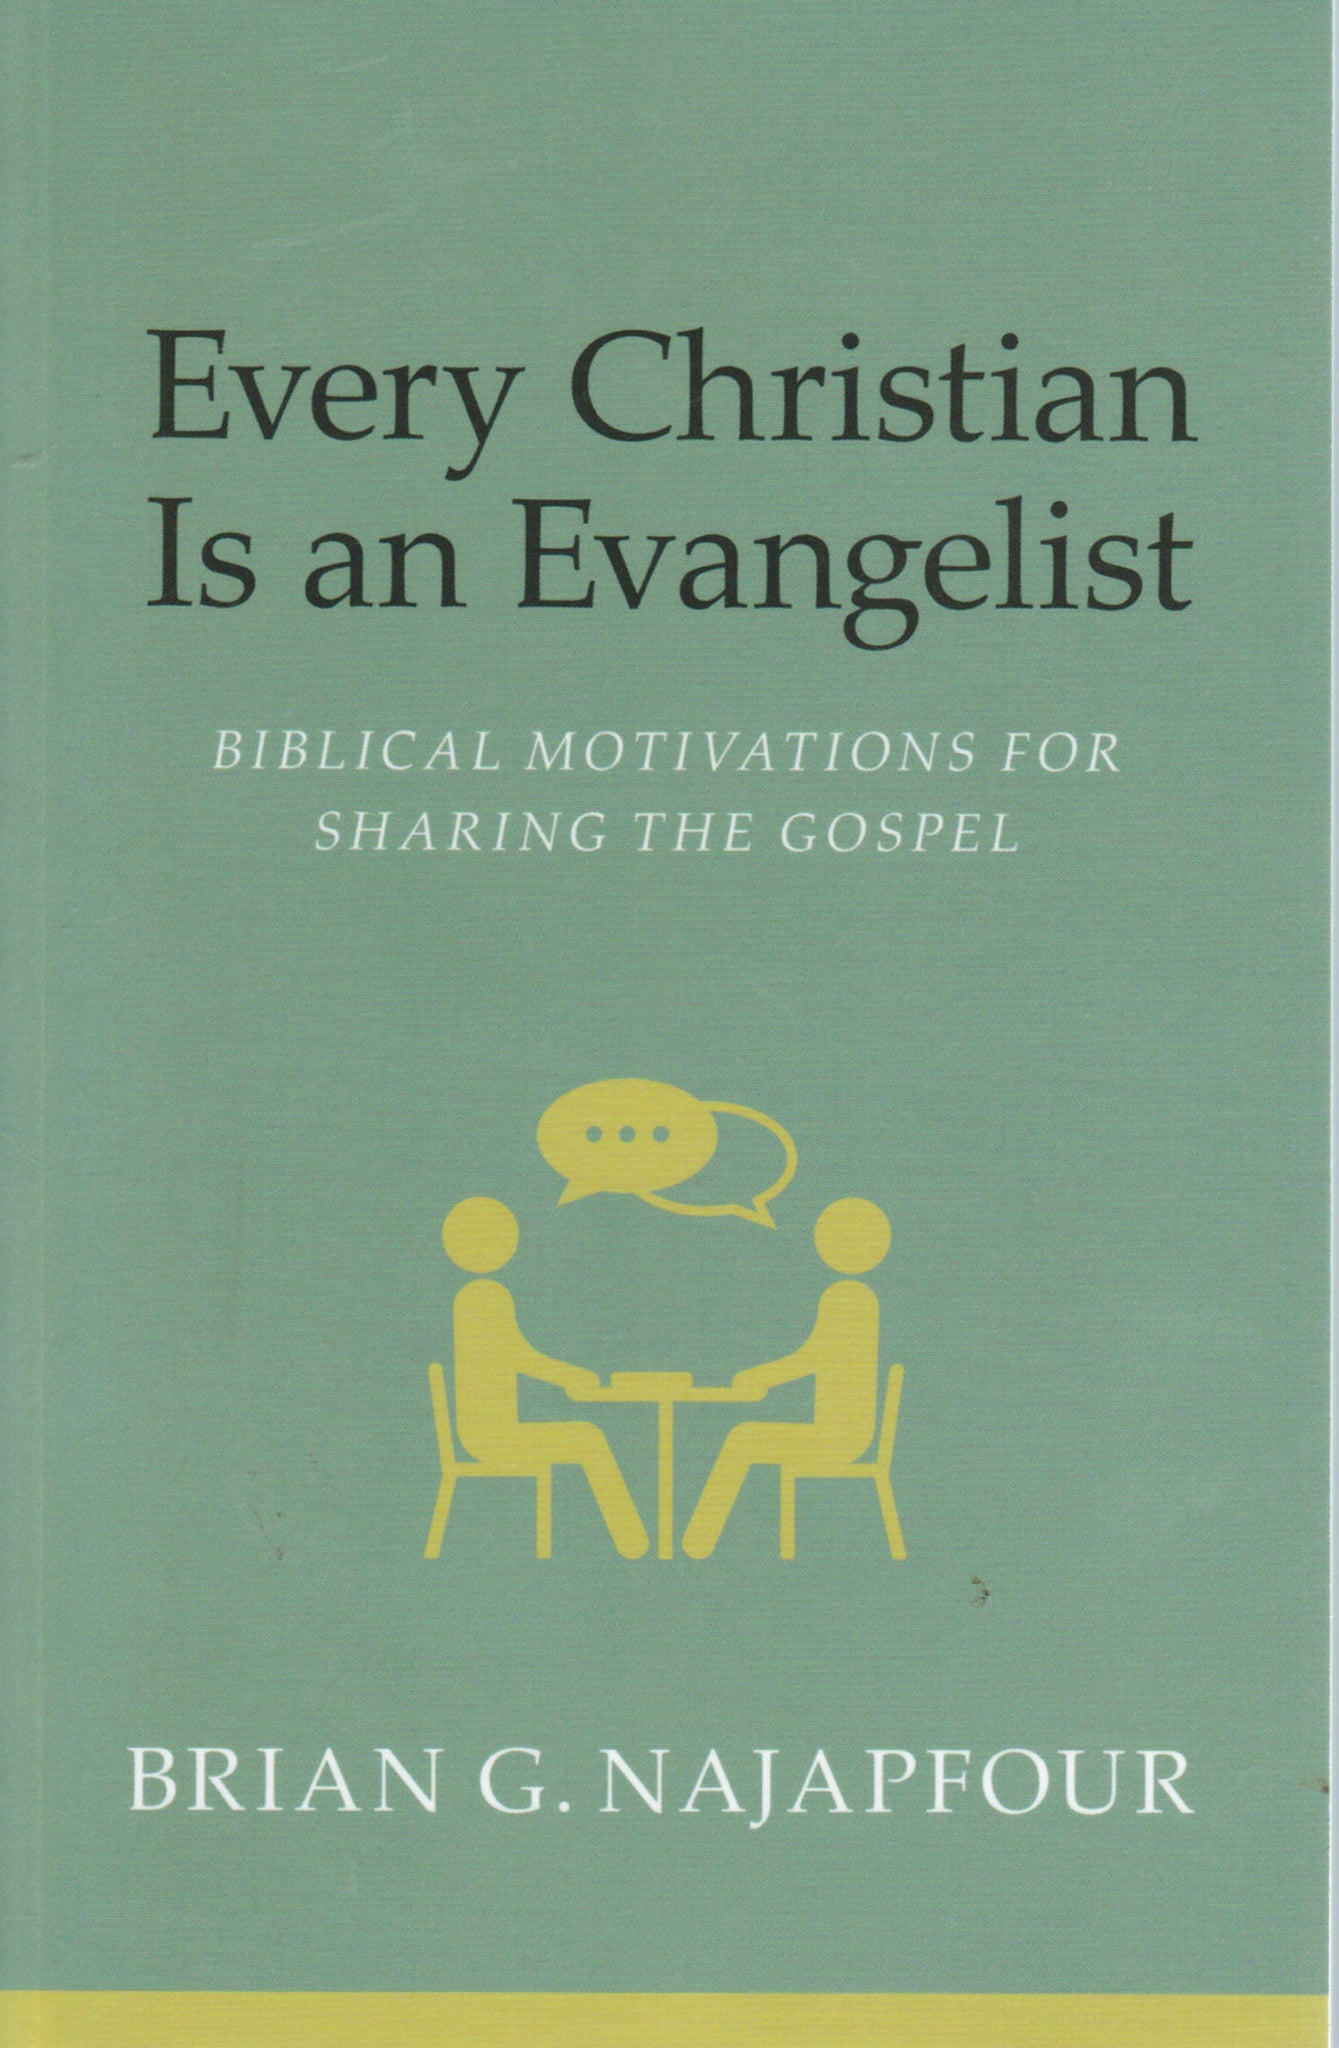 Every Christian is an Evangelist: Biblical Motivations for Sharing the Gospel